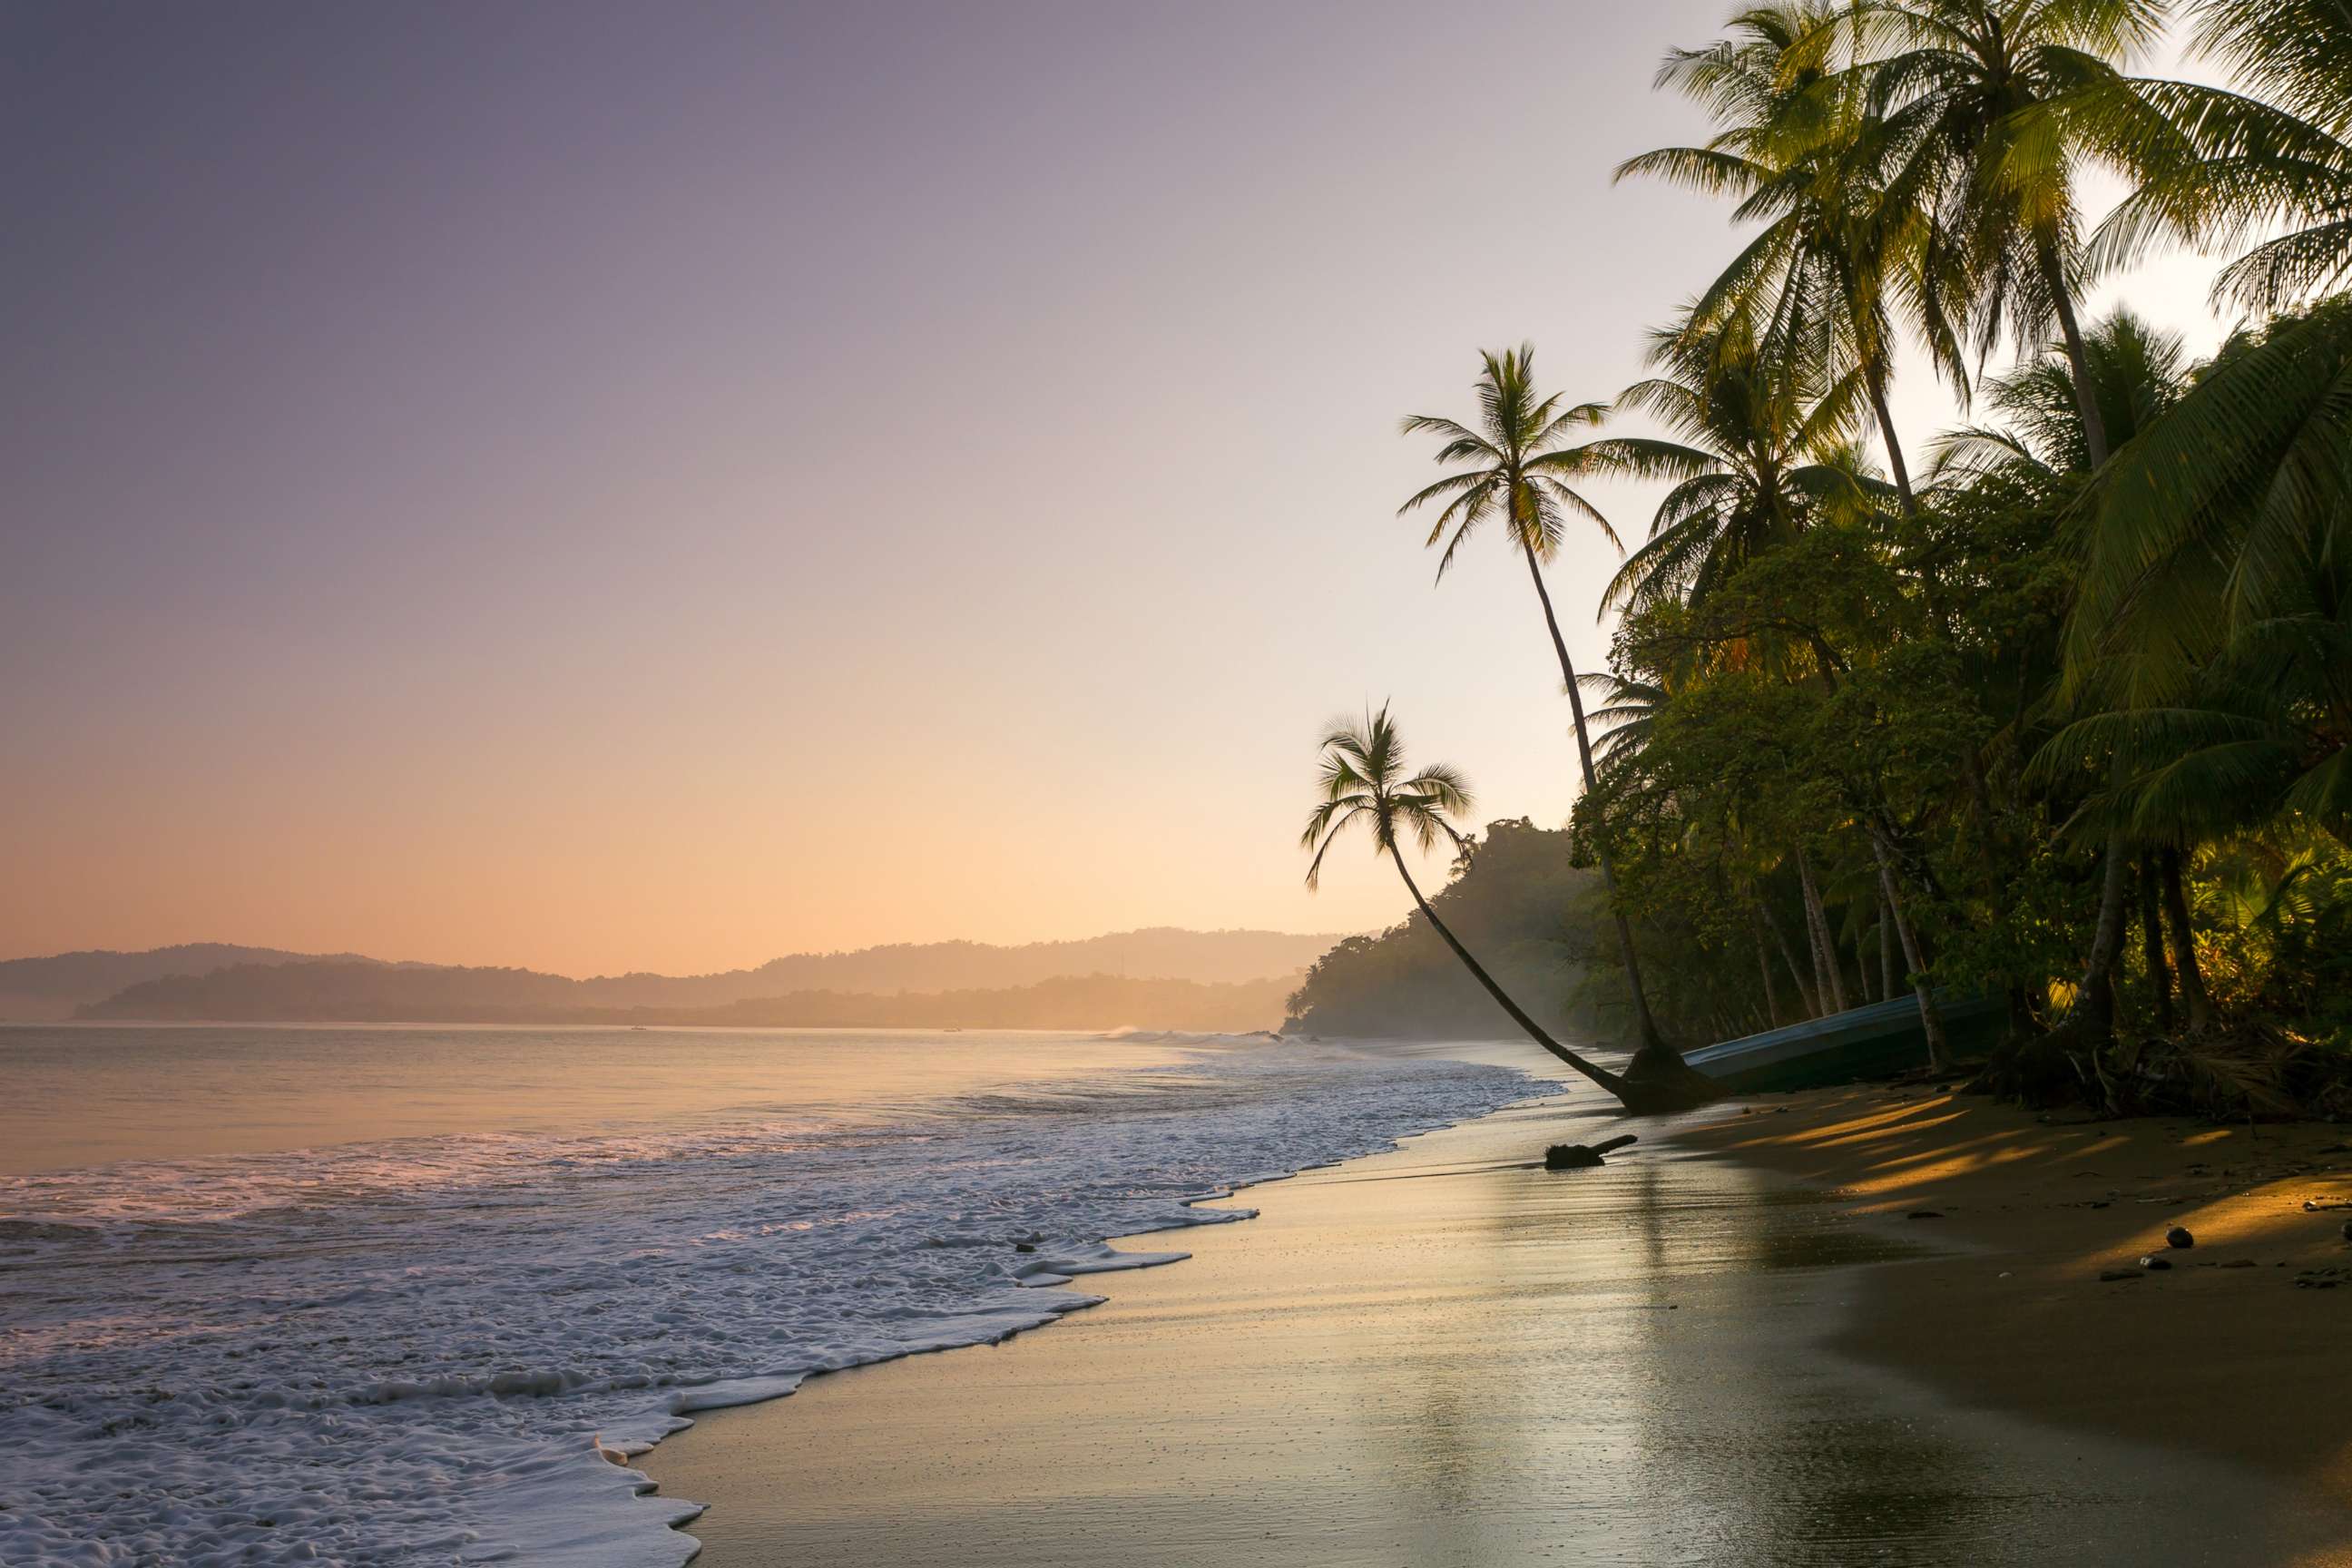 PHOTO: A palm fringed beach in Bahia Drakes, Osa Peninsula, Costa Rica is pictured in this undated stock photo.